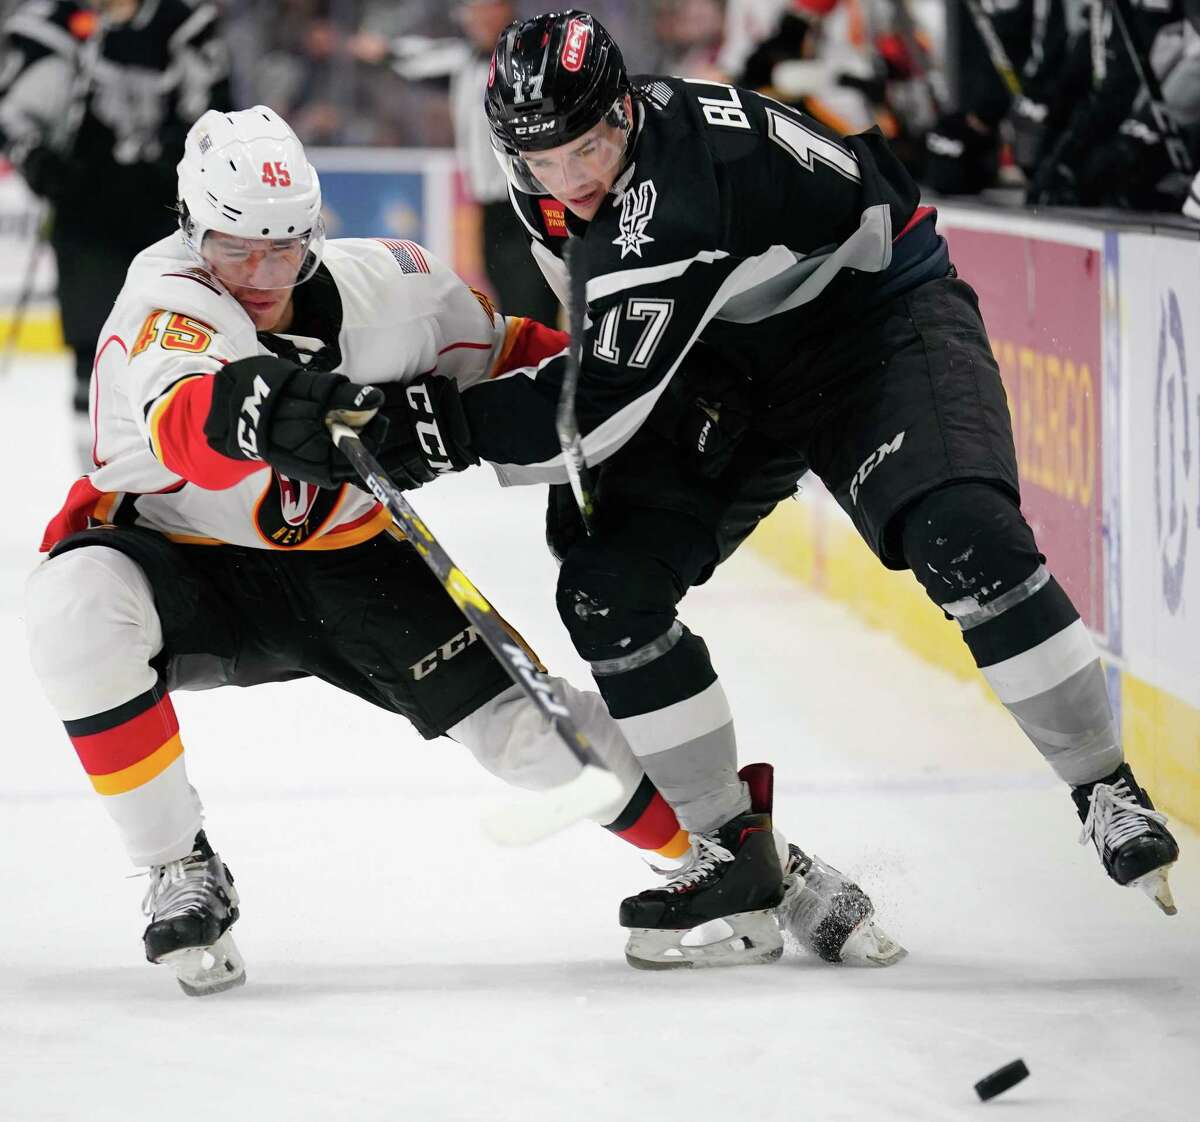 The Stockton Heat play the San Antonio Rampage during the second period of an AHL hockey game, Saturday, Jan. 26, 2019, in San Antonio. (Darren Abate/AHL)